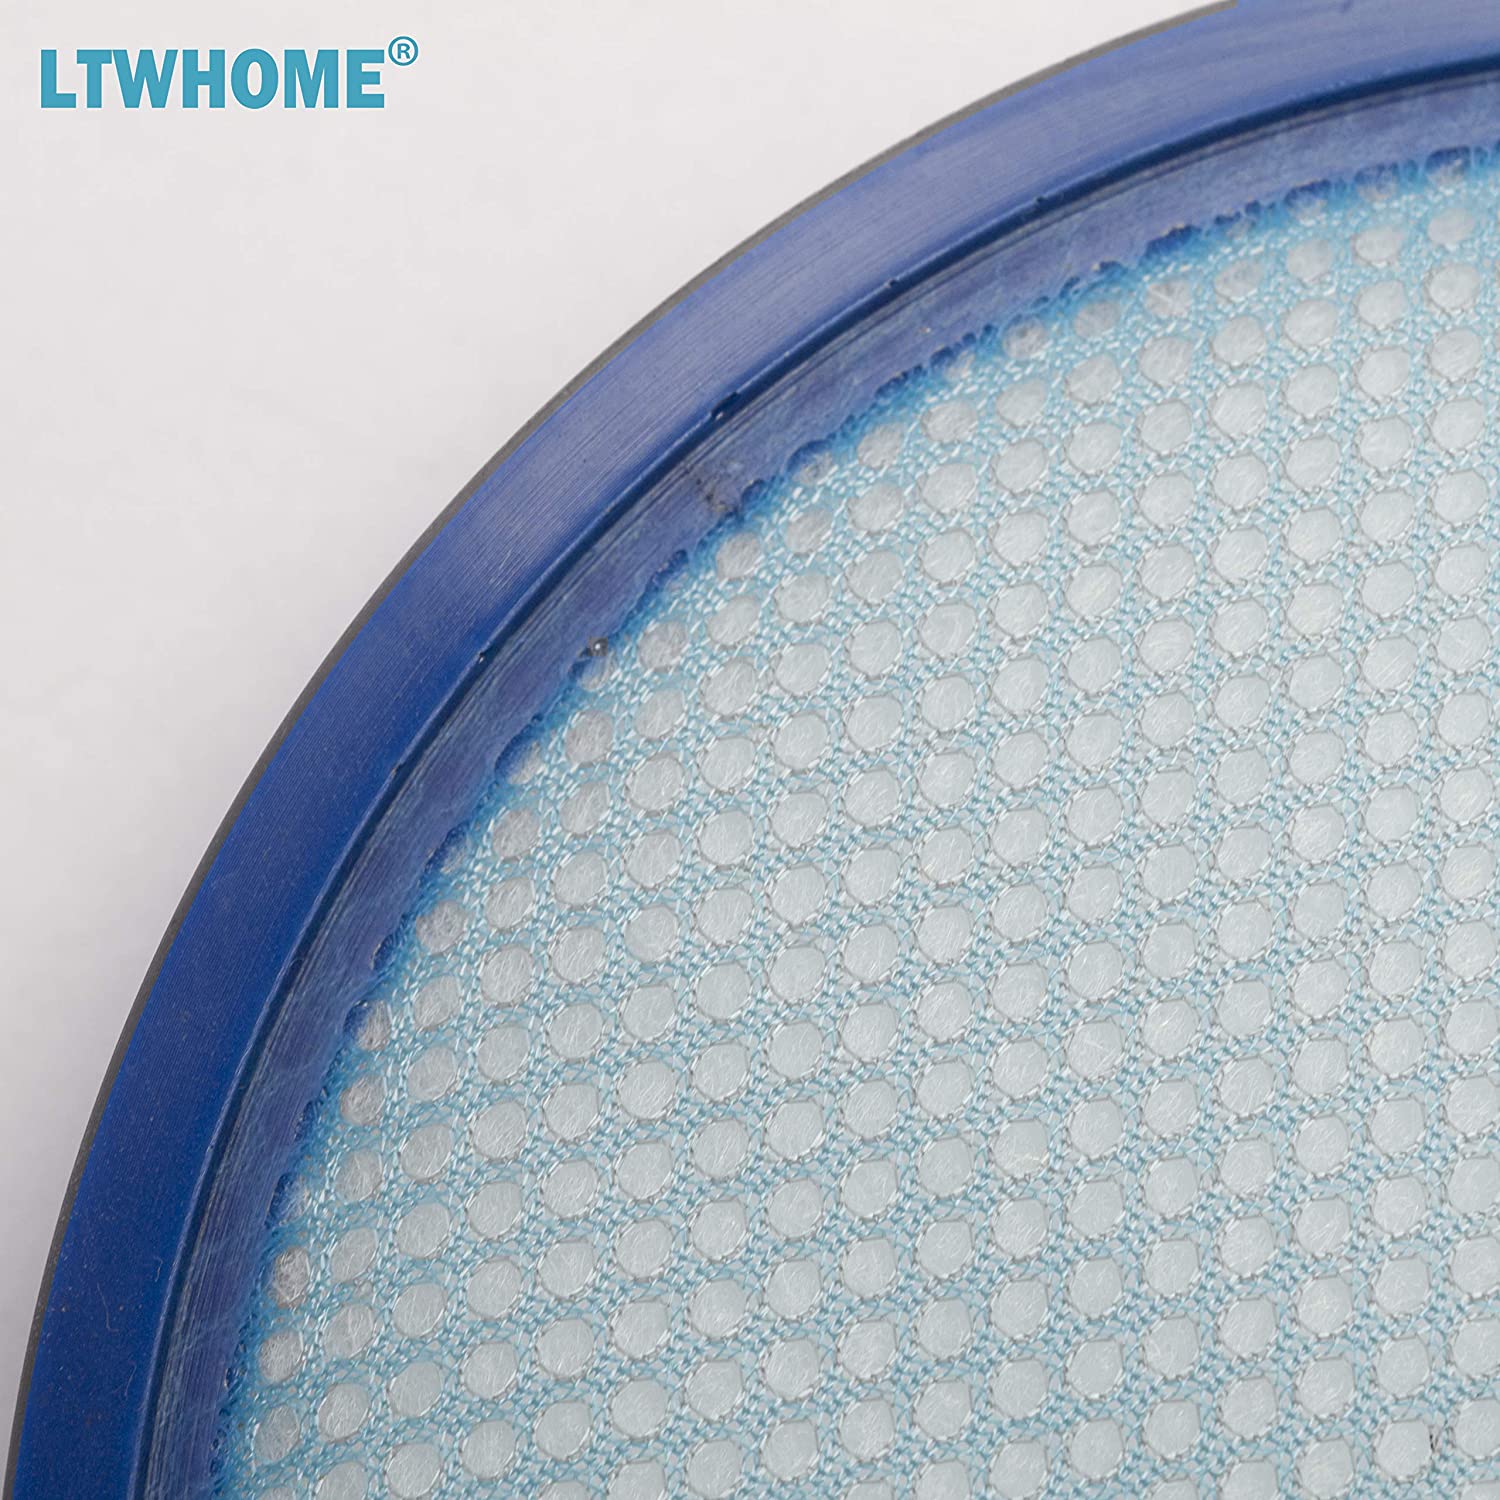 LTWHOME Replacement Primary Blue Sponge Filter Fit for Hoover WindTunnel, Elite Whole House Bagless Upright Vacuum Cleaners, Compares to Part No 304087001 (Pack of 2)